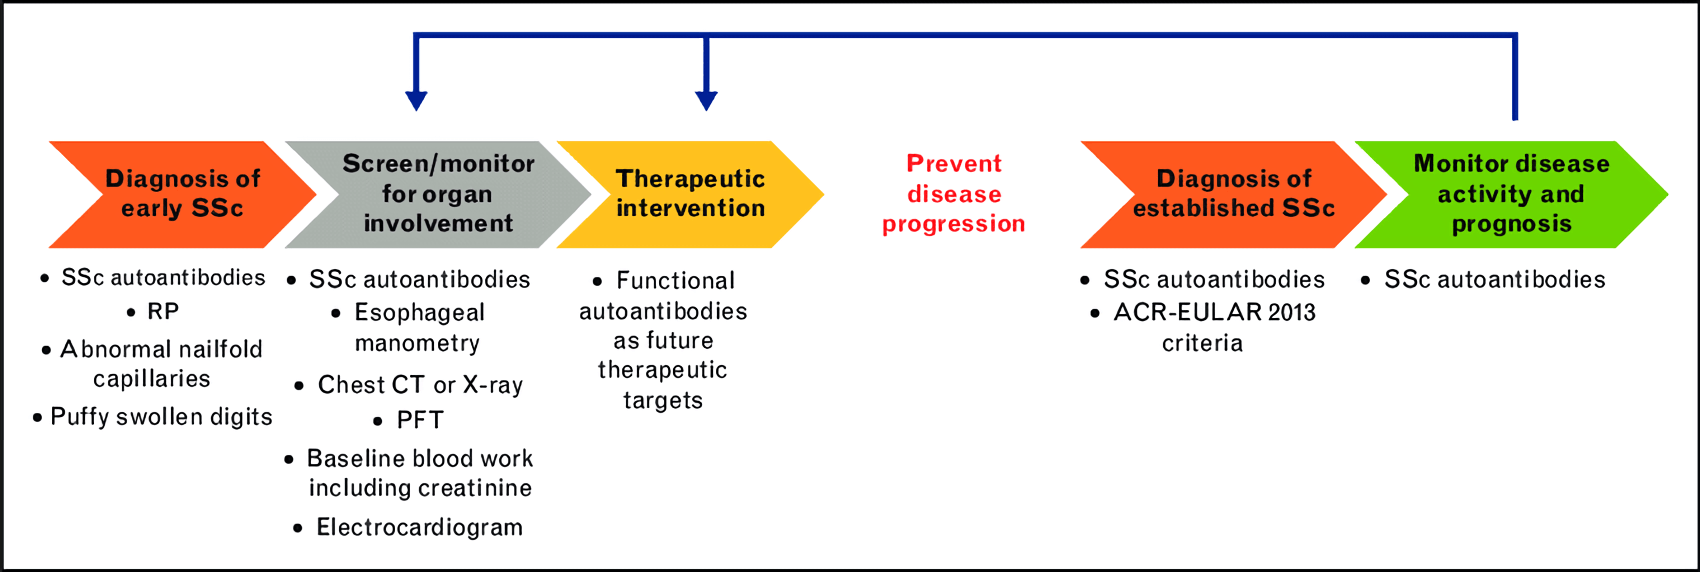 Clinical care pathway using an early diagnosis of SSc and autoantibody testing.